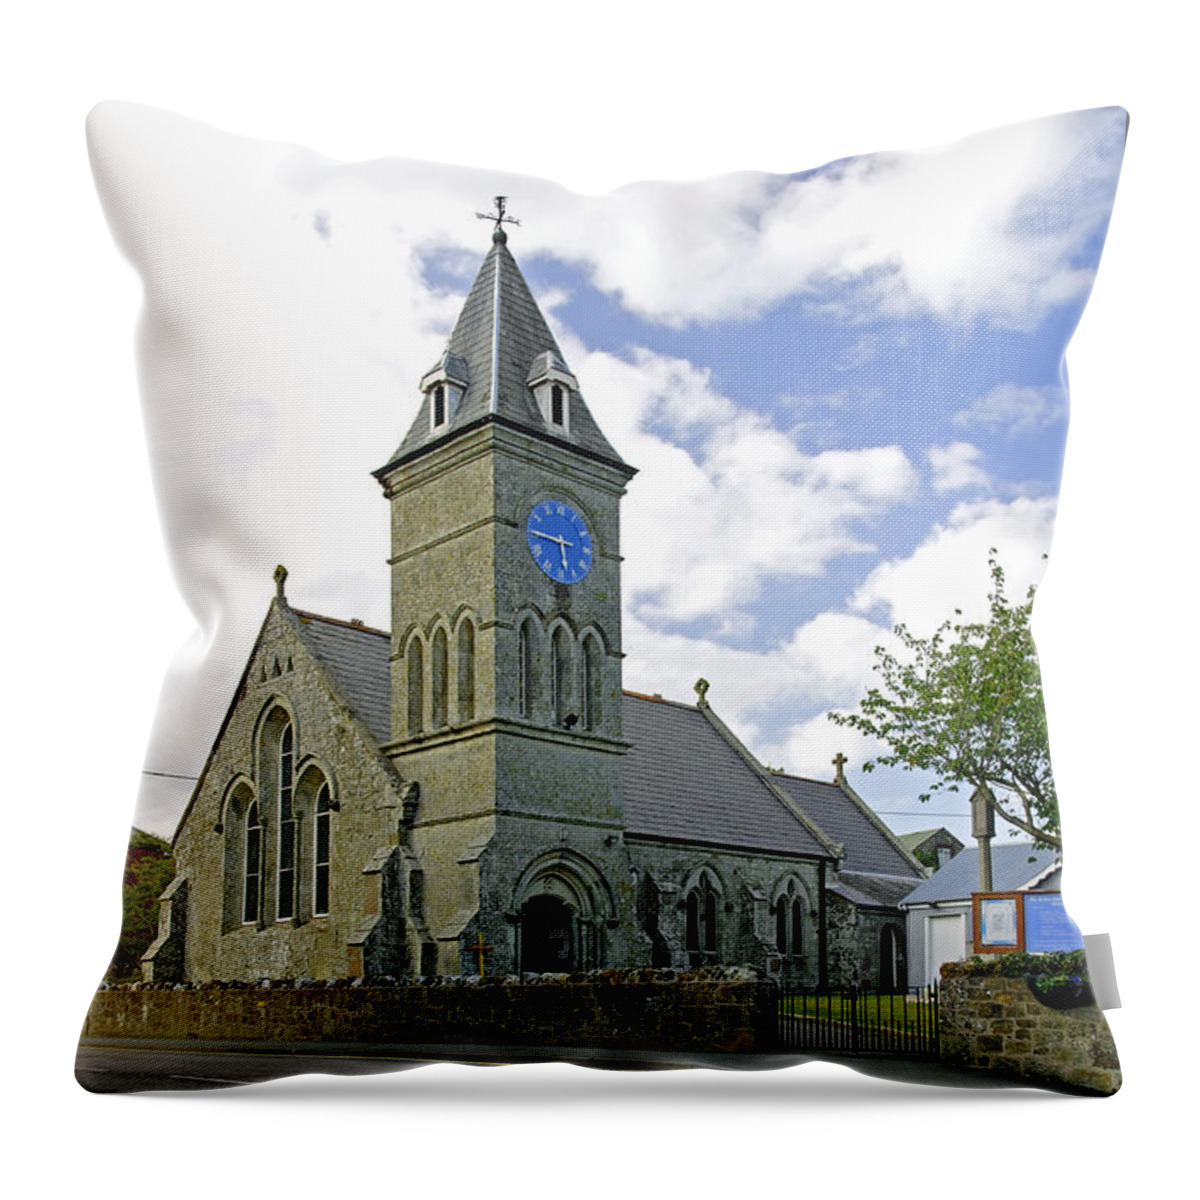 Europe Throw Pillow featuring the photograph St John The Evangelist Church at Wroxall by Rod Johnson